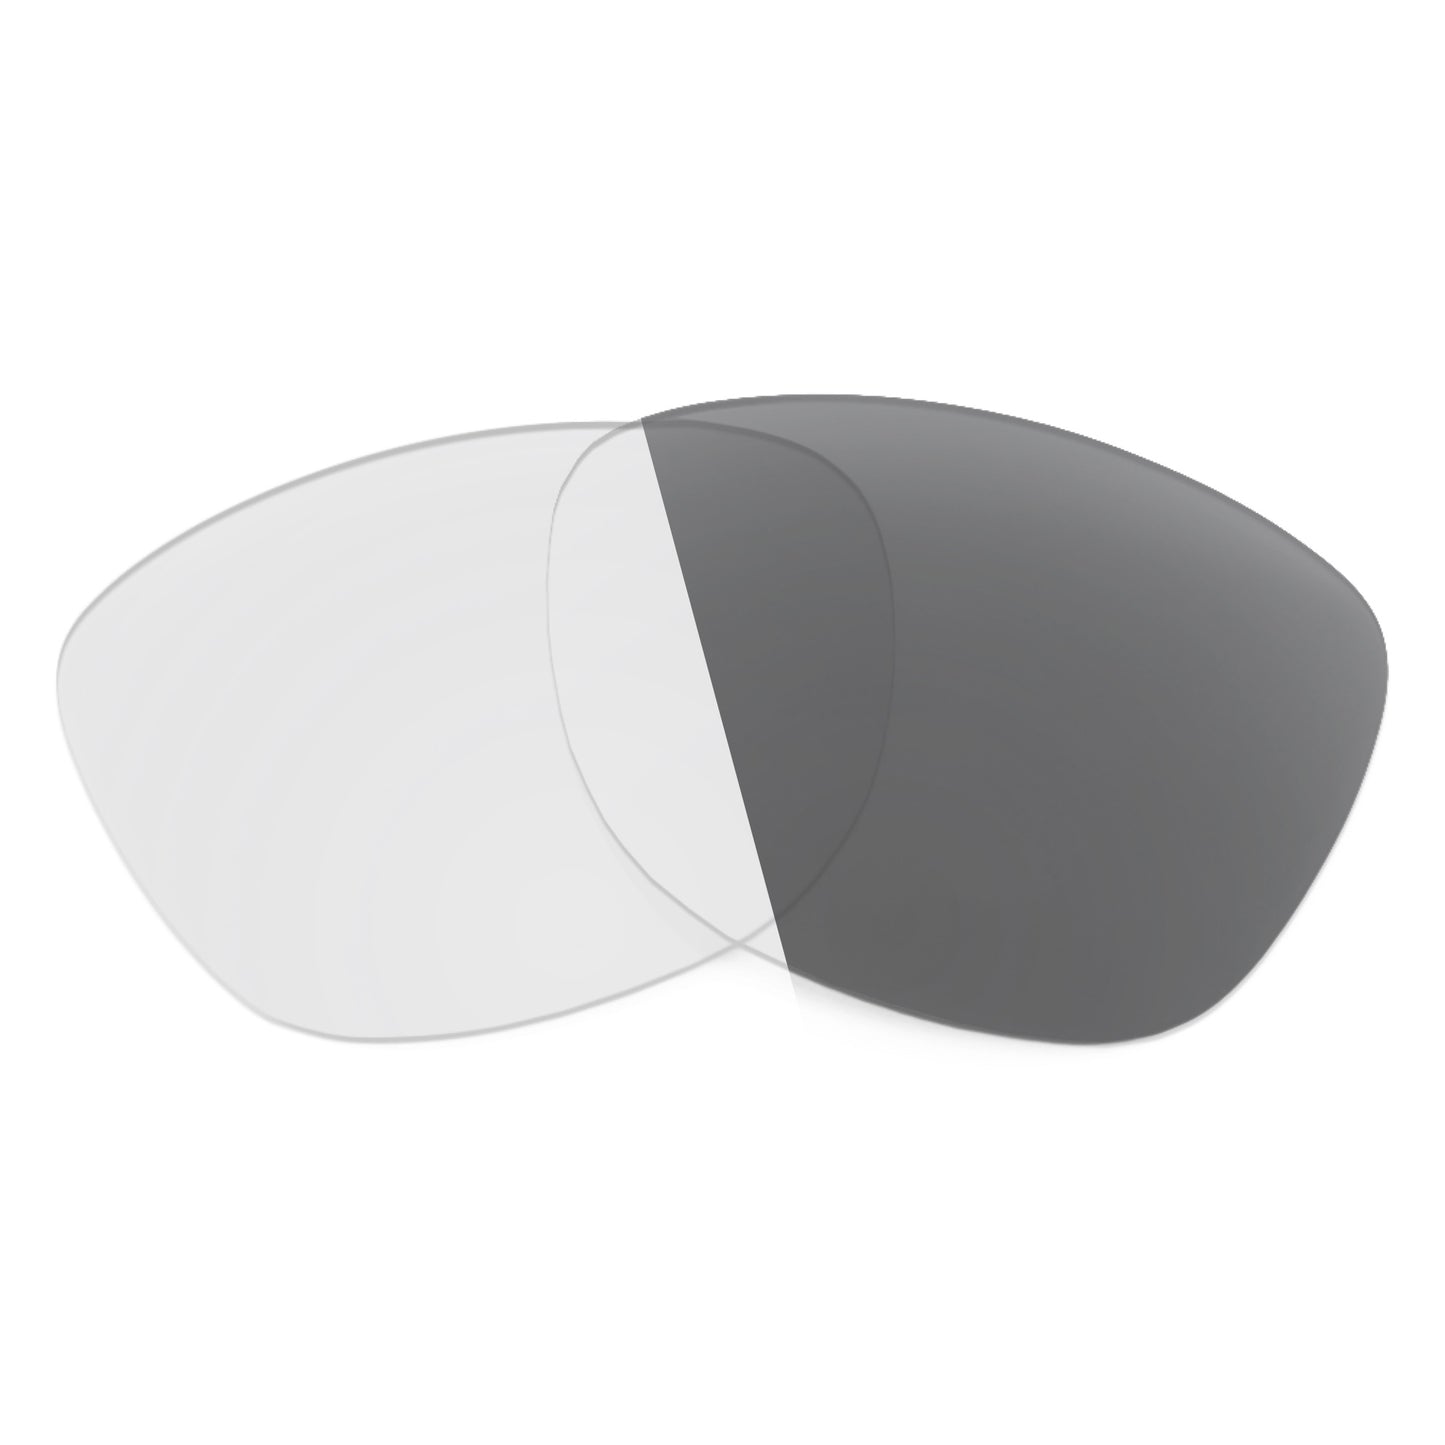 Revant replacement lenses for VonZipper Sidepipe Non-Polarized Adapt Gray Photochromic